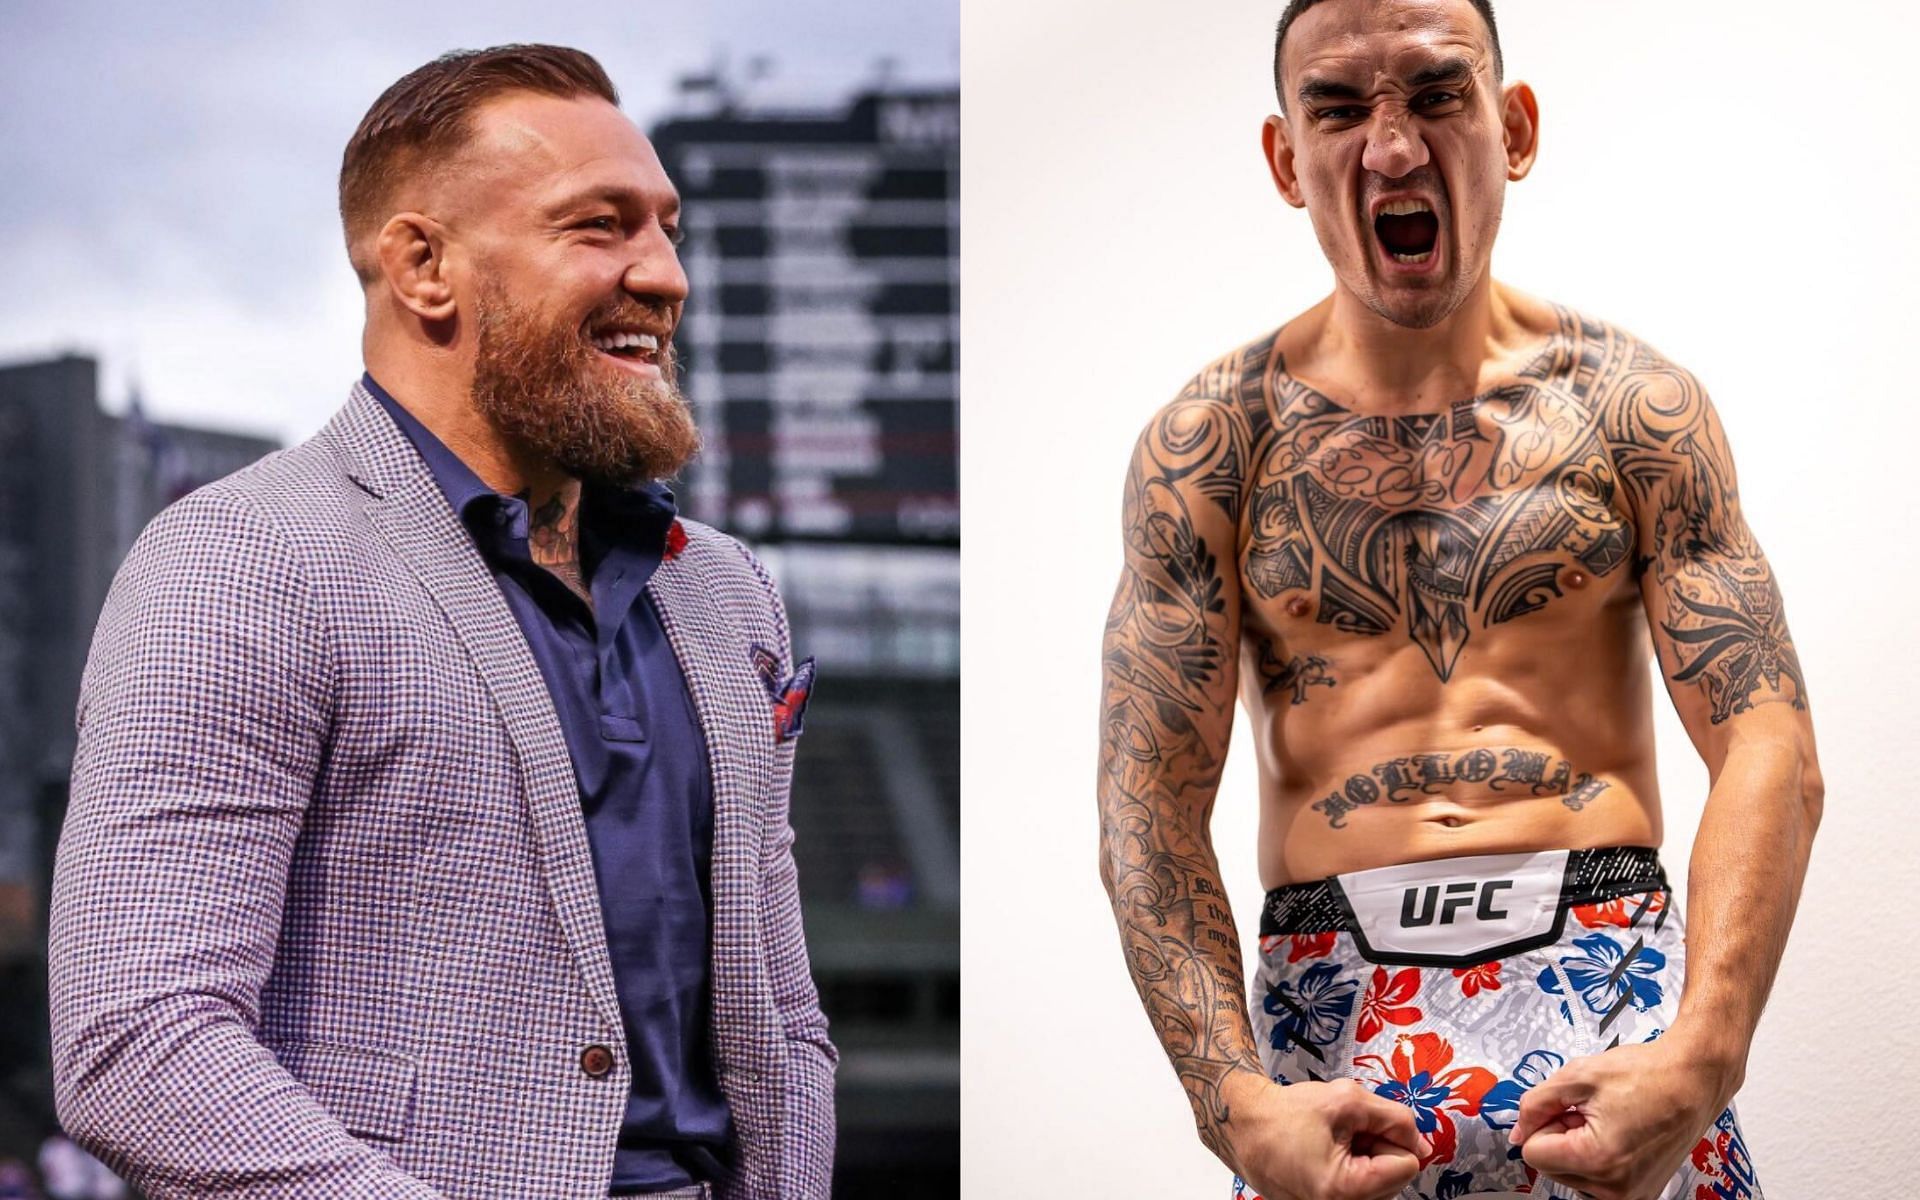 Max Holloway (right) fires back at Conor McGregor (left) for laughing at the Hawaiian